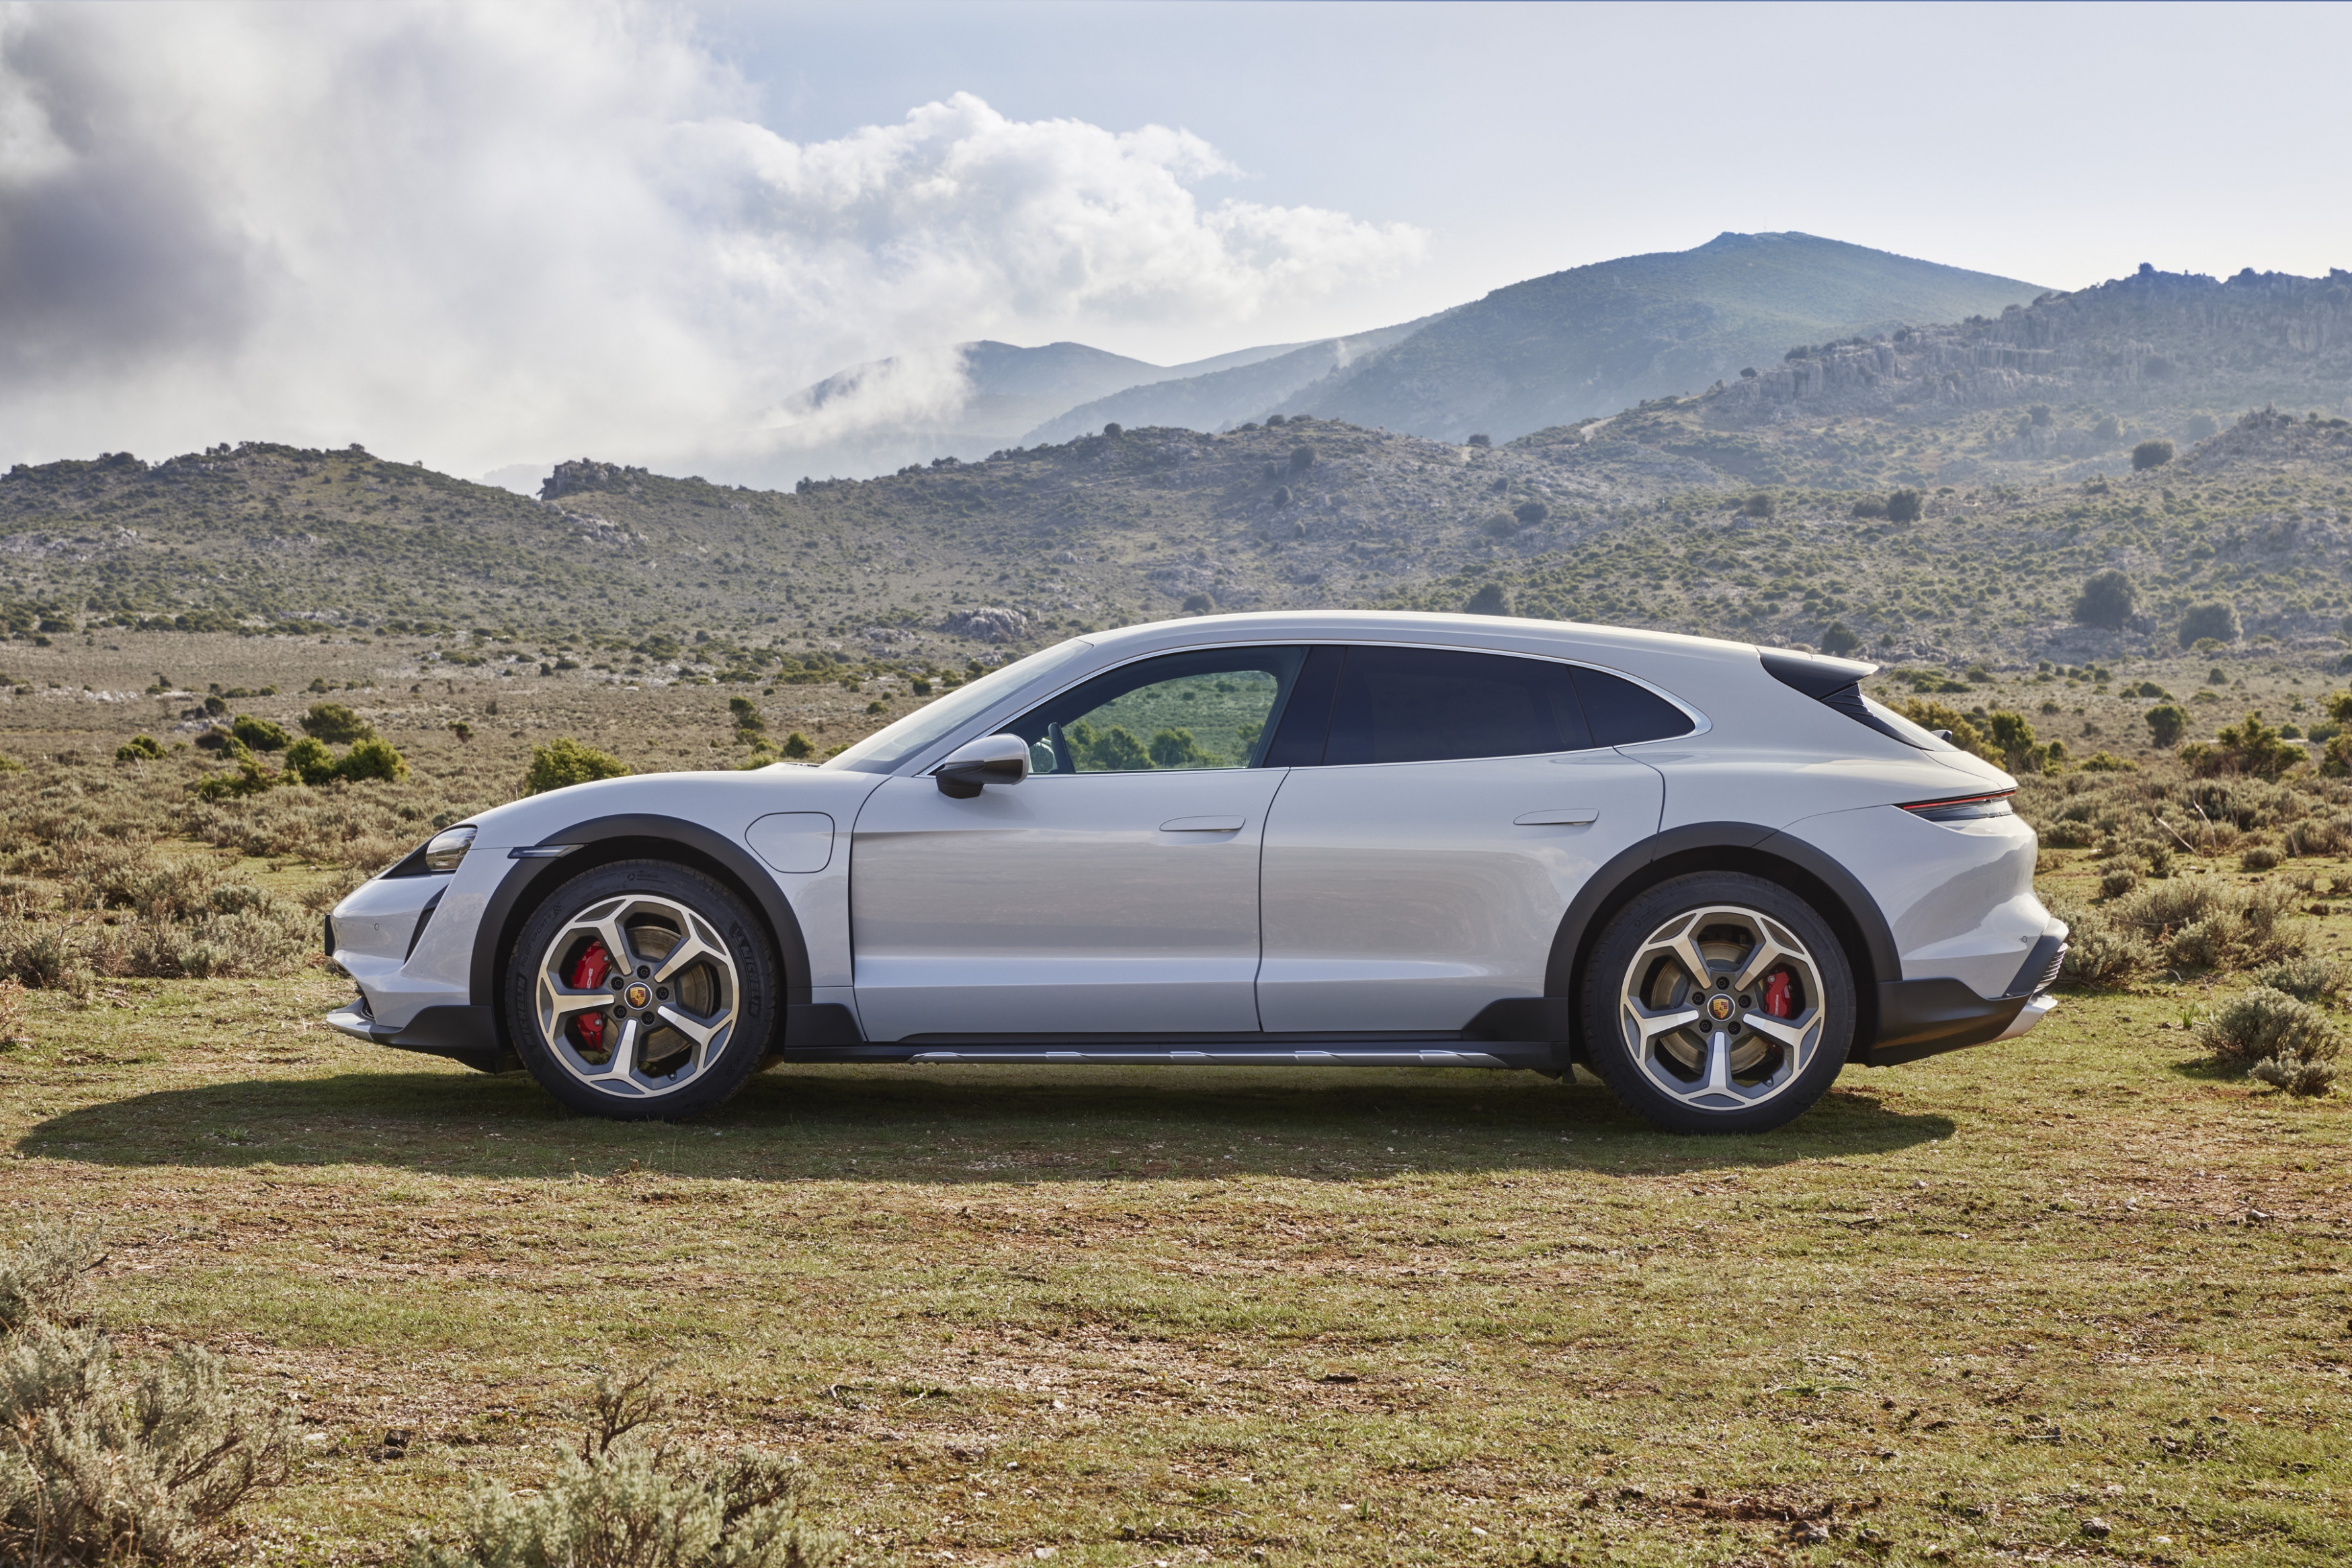 Porsche Introduces 2021 Taycan Cross Turismo for EV Adventures Off the Beaten Path